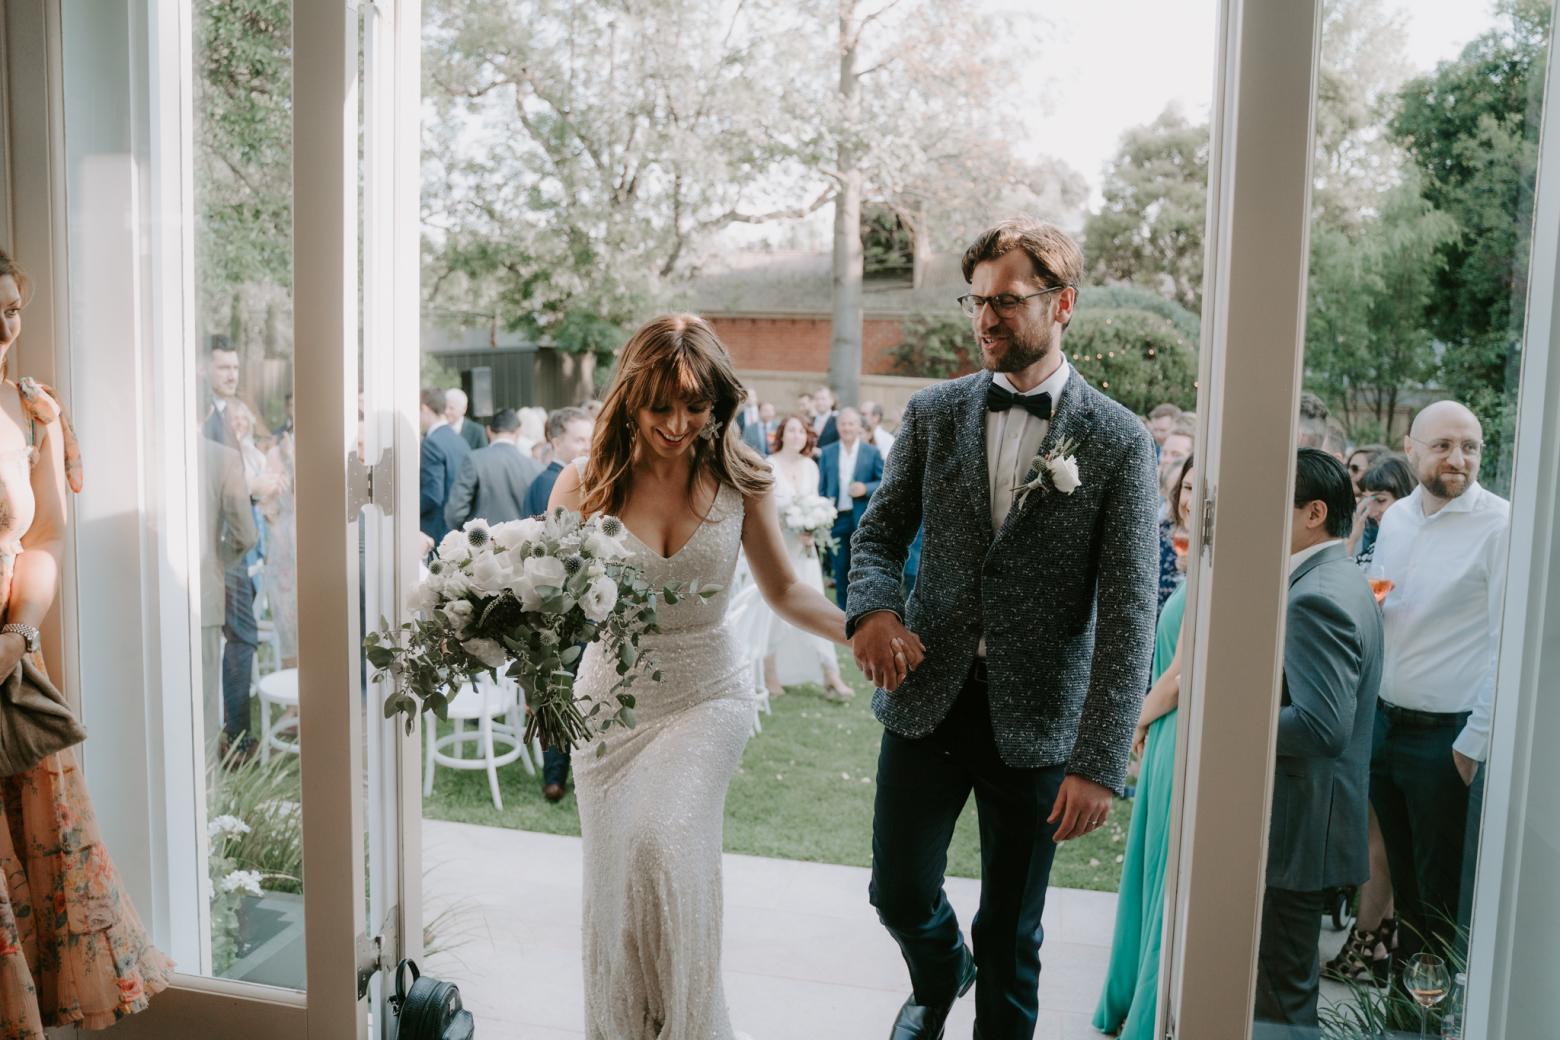 Real bride Ania wore the Luxe Lola wedding dress by Karen Willis Holmes.